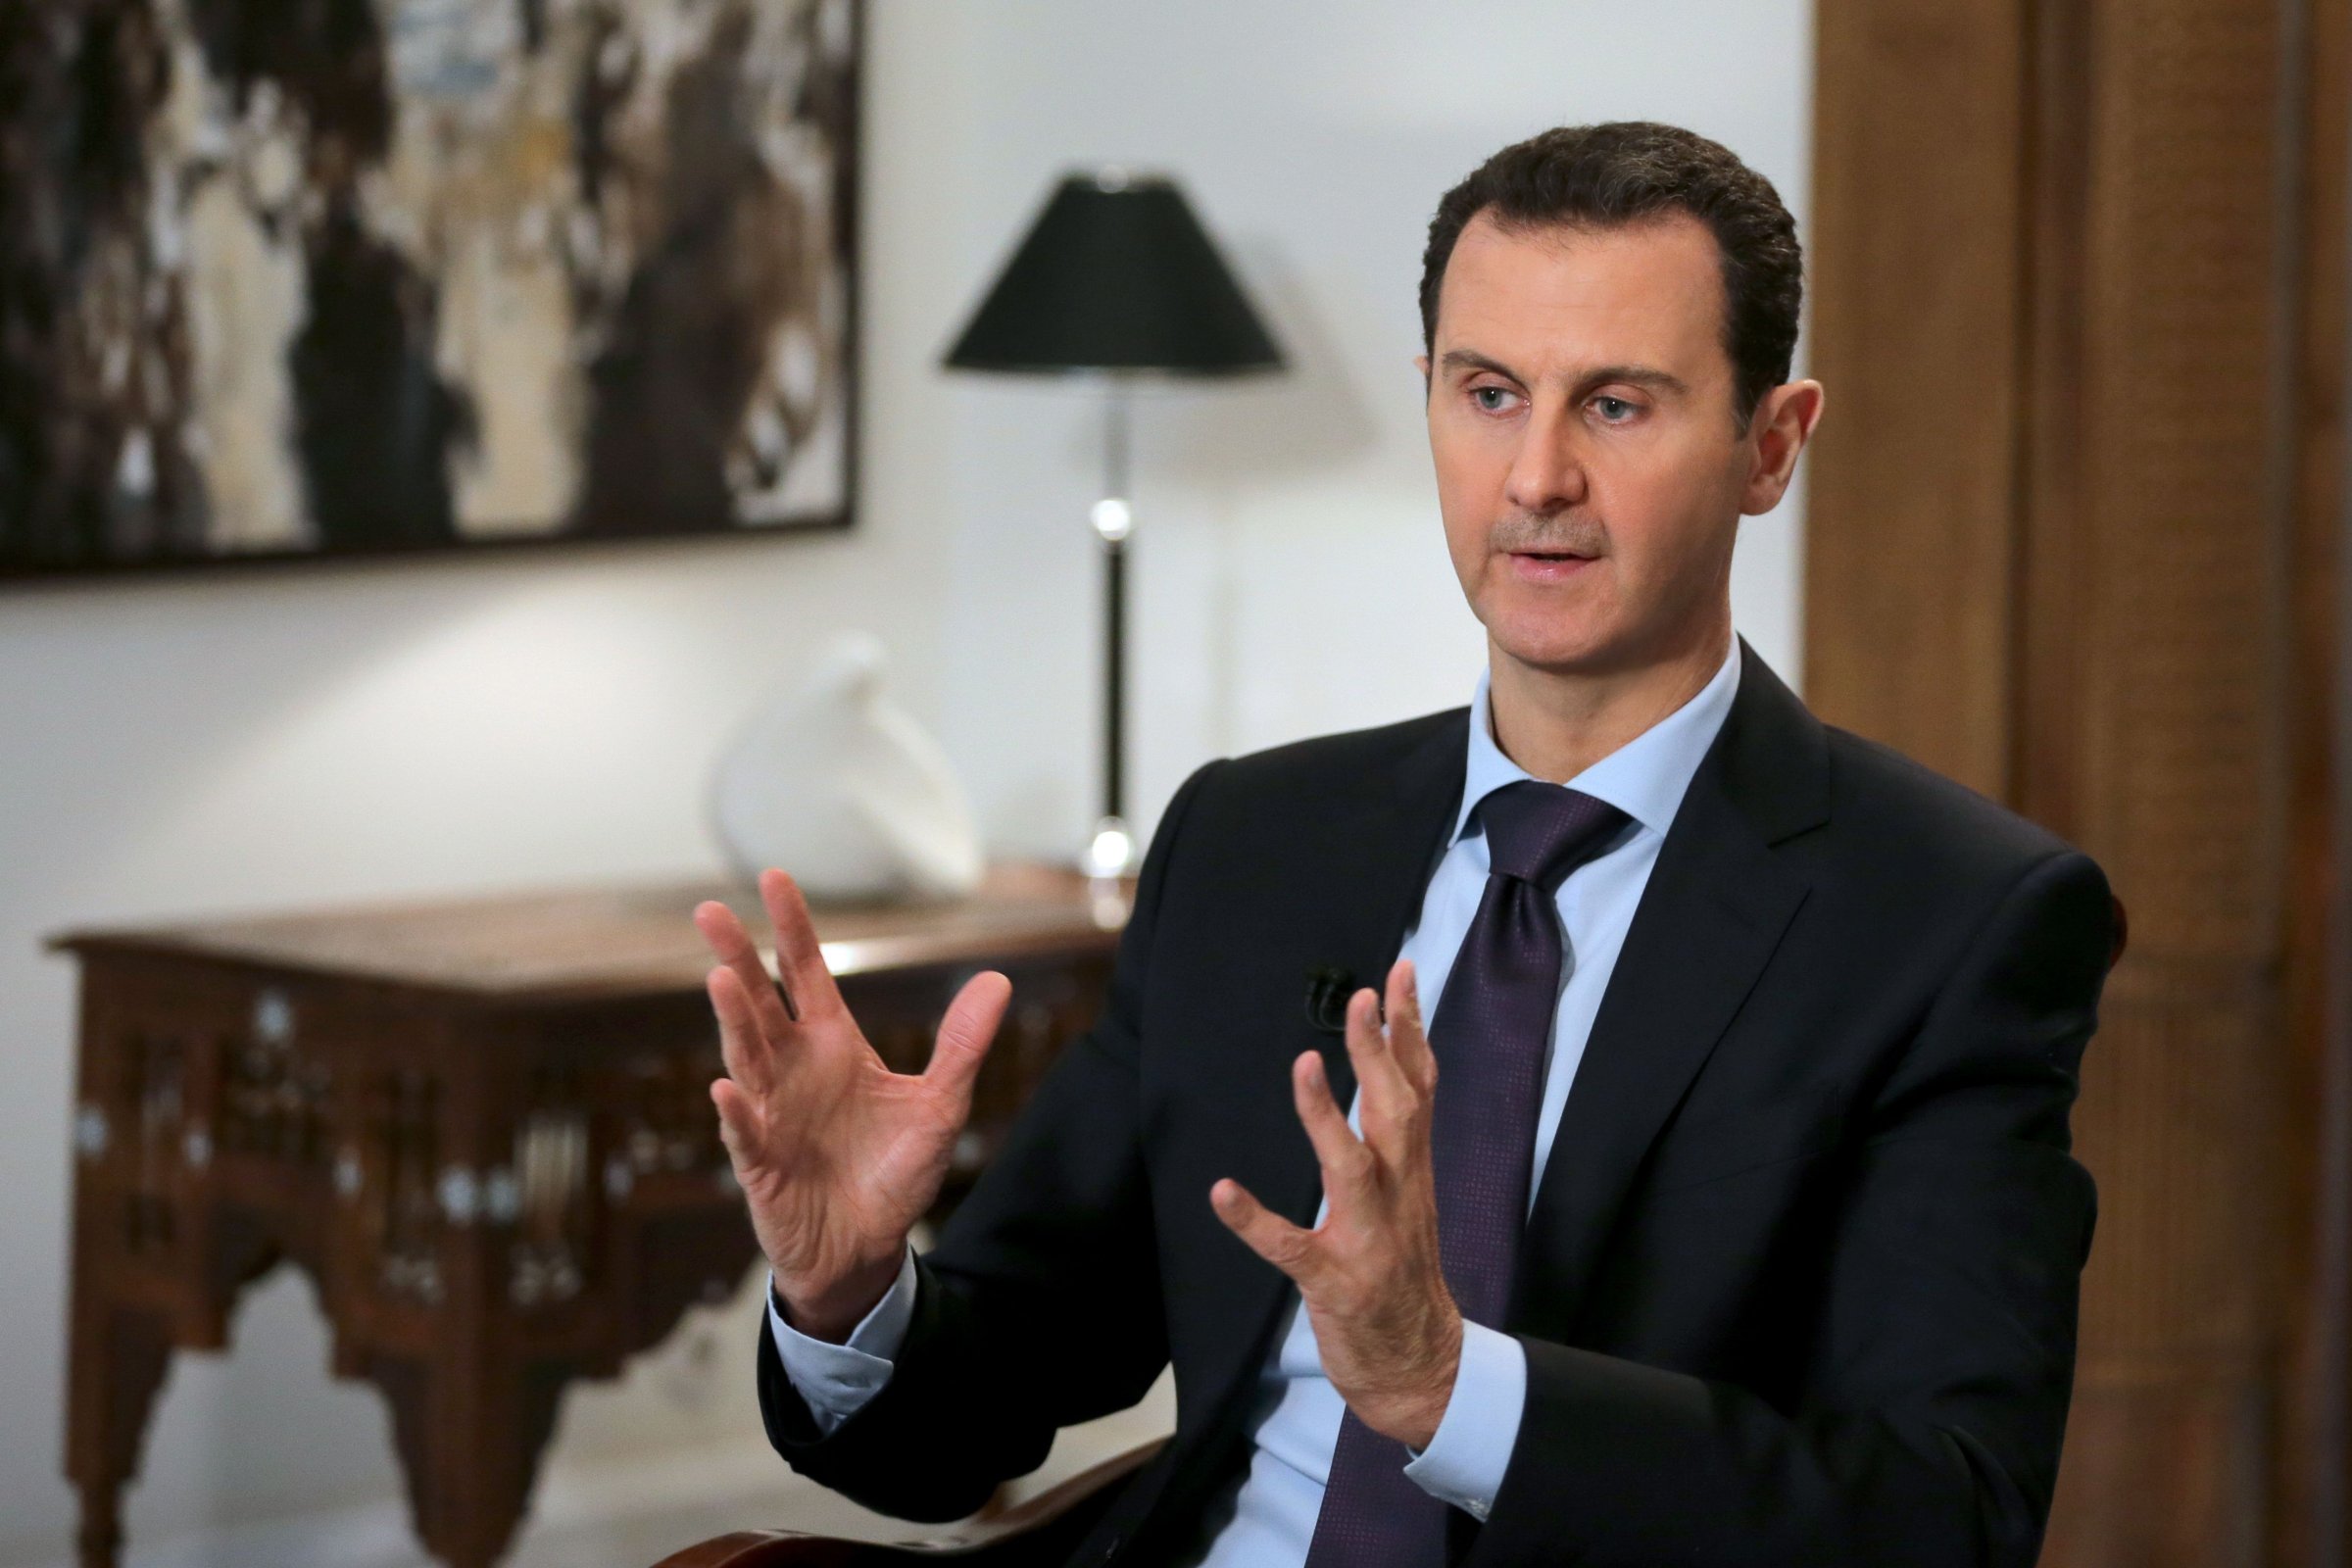 Syrian President Bashar al-Assad gestures during an exclusive interview in the capital Damascus on February 11, 2016.